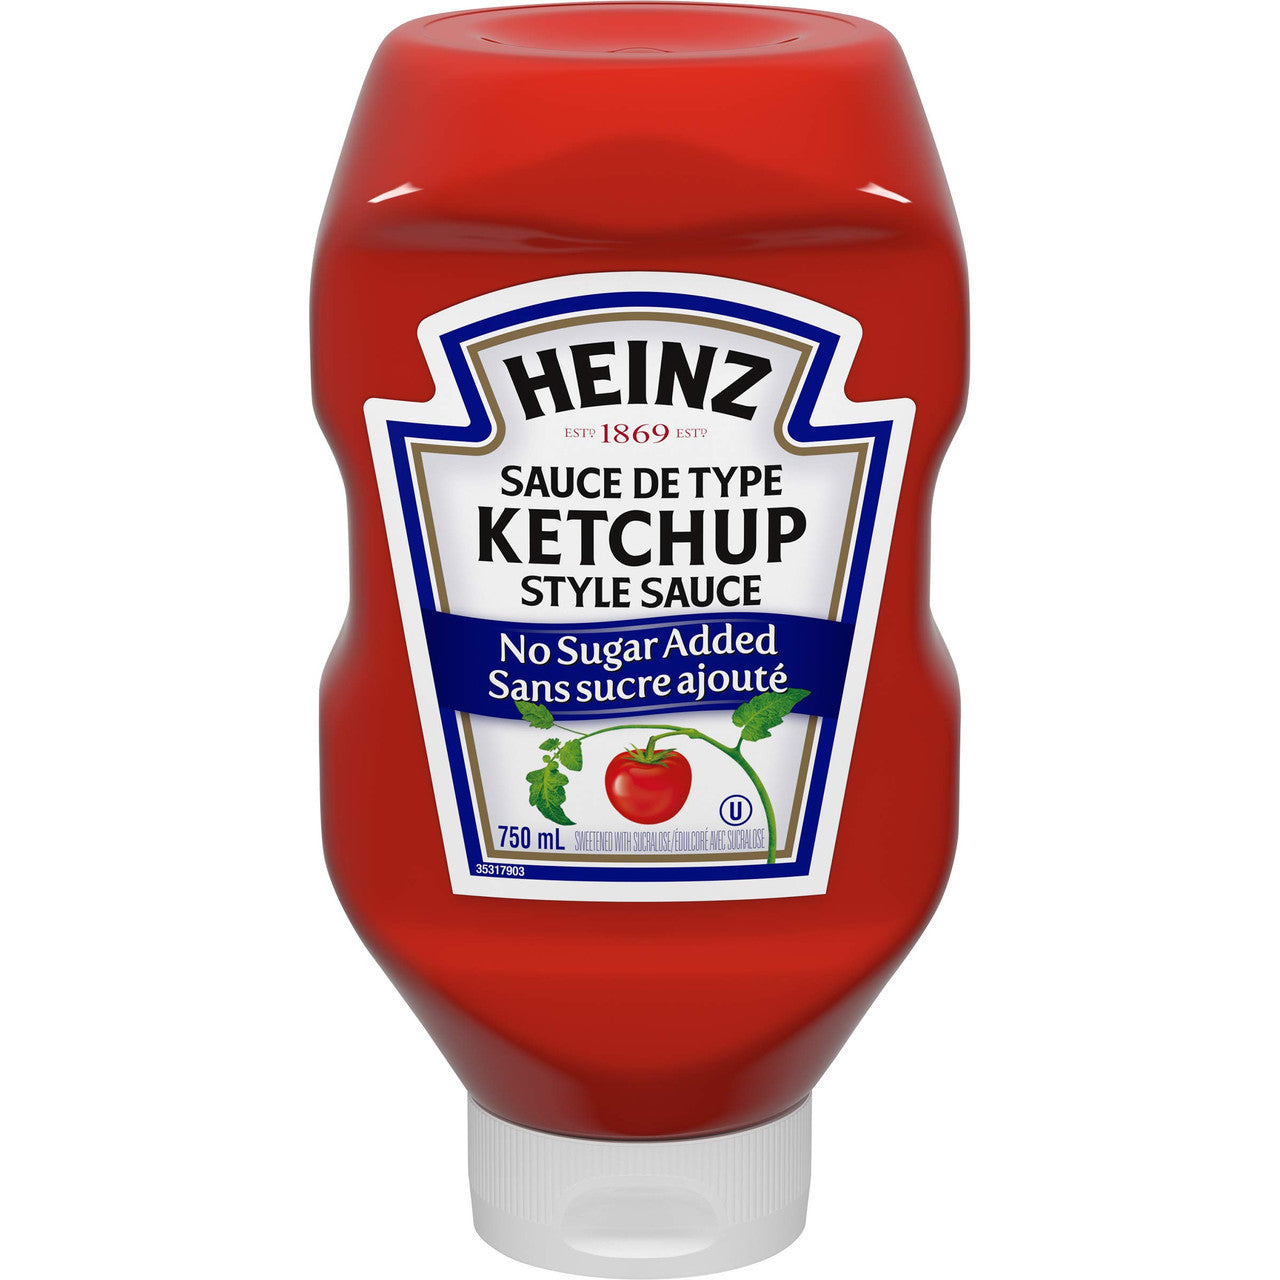 HEINZ Ketchup No Sugar Added, 750ml, 25.4oz., (12 pack) {Imported from Canada}